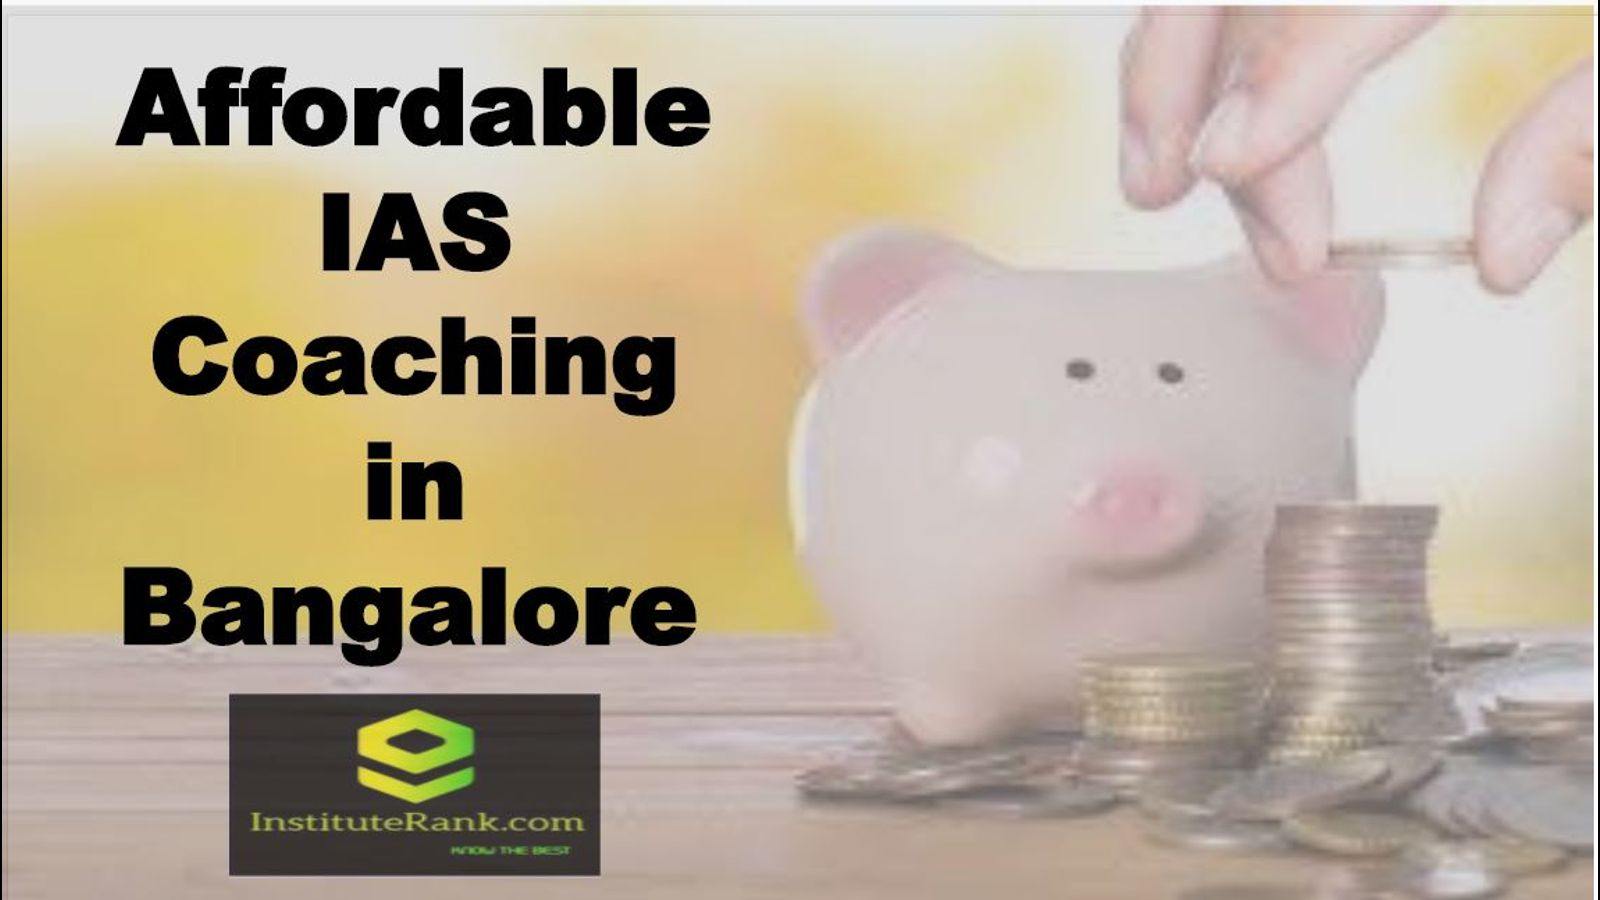 Affordable IAS coaching in Bangalore